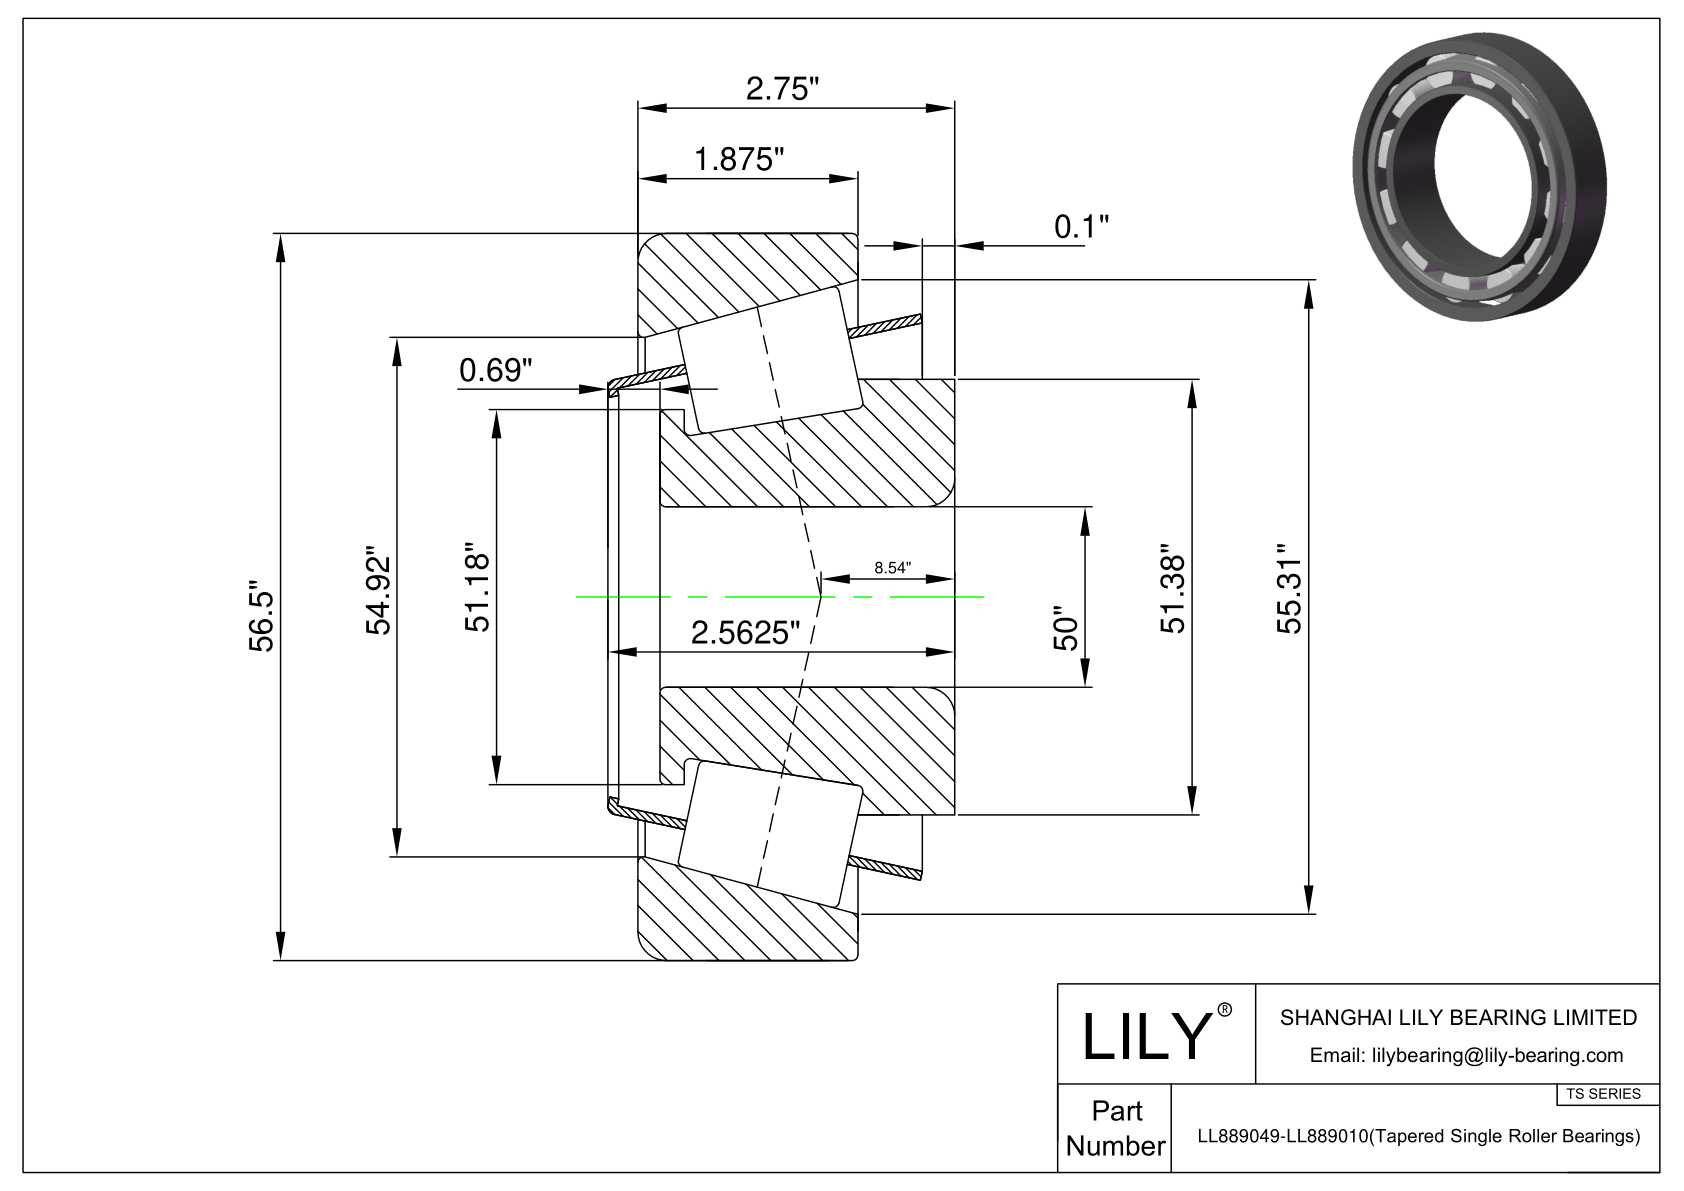 LL889049-LL889010 TS (Tapered Single Roller Bearings) (Imperial) cad drawing